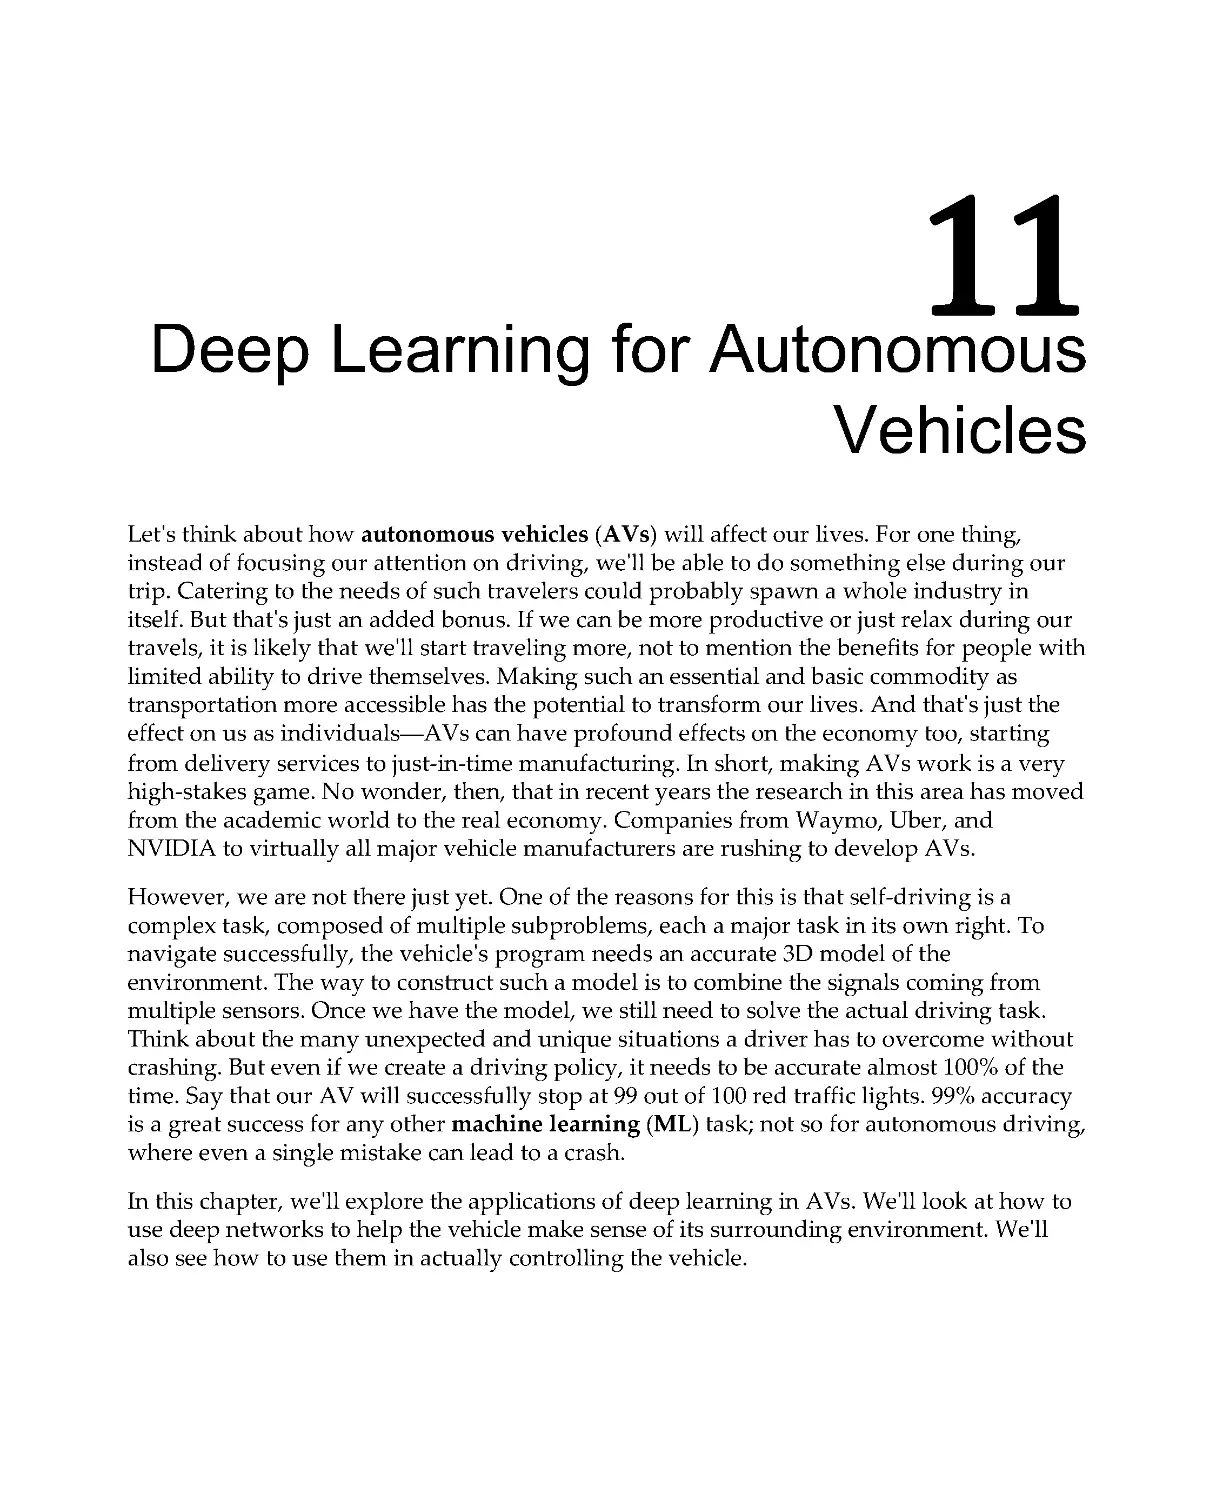 Chapter 11: Deep Learning for Autonomous Vehicles